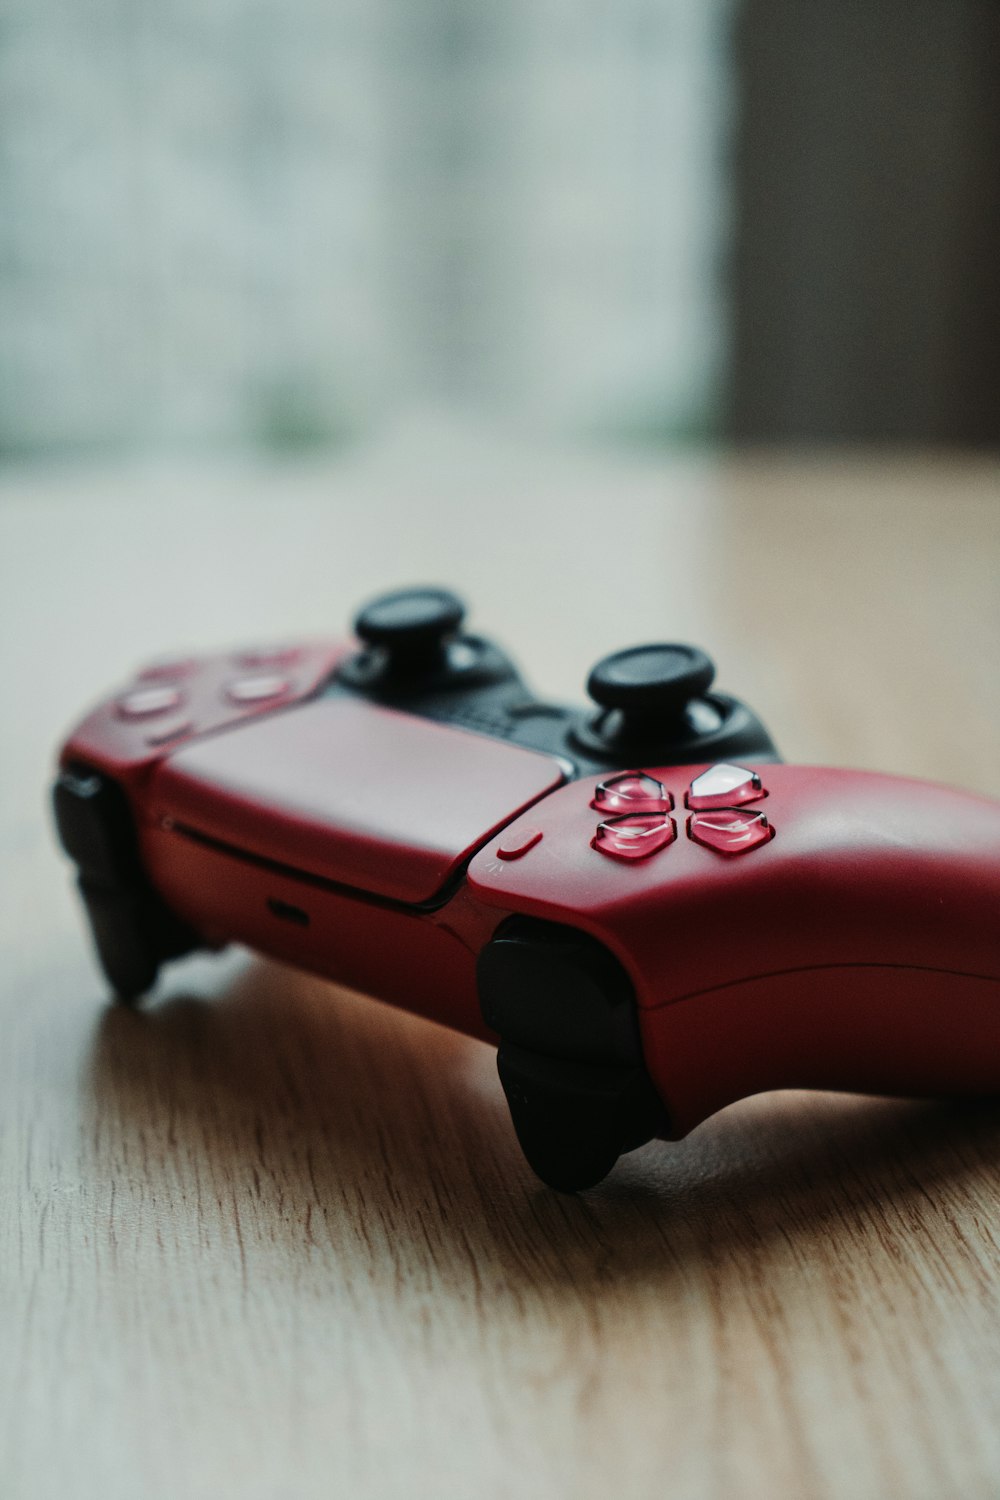 a close up of a video game controller on a table